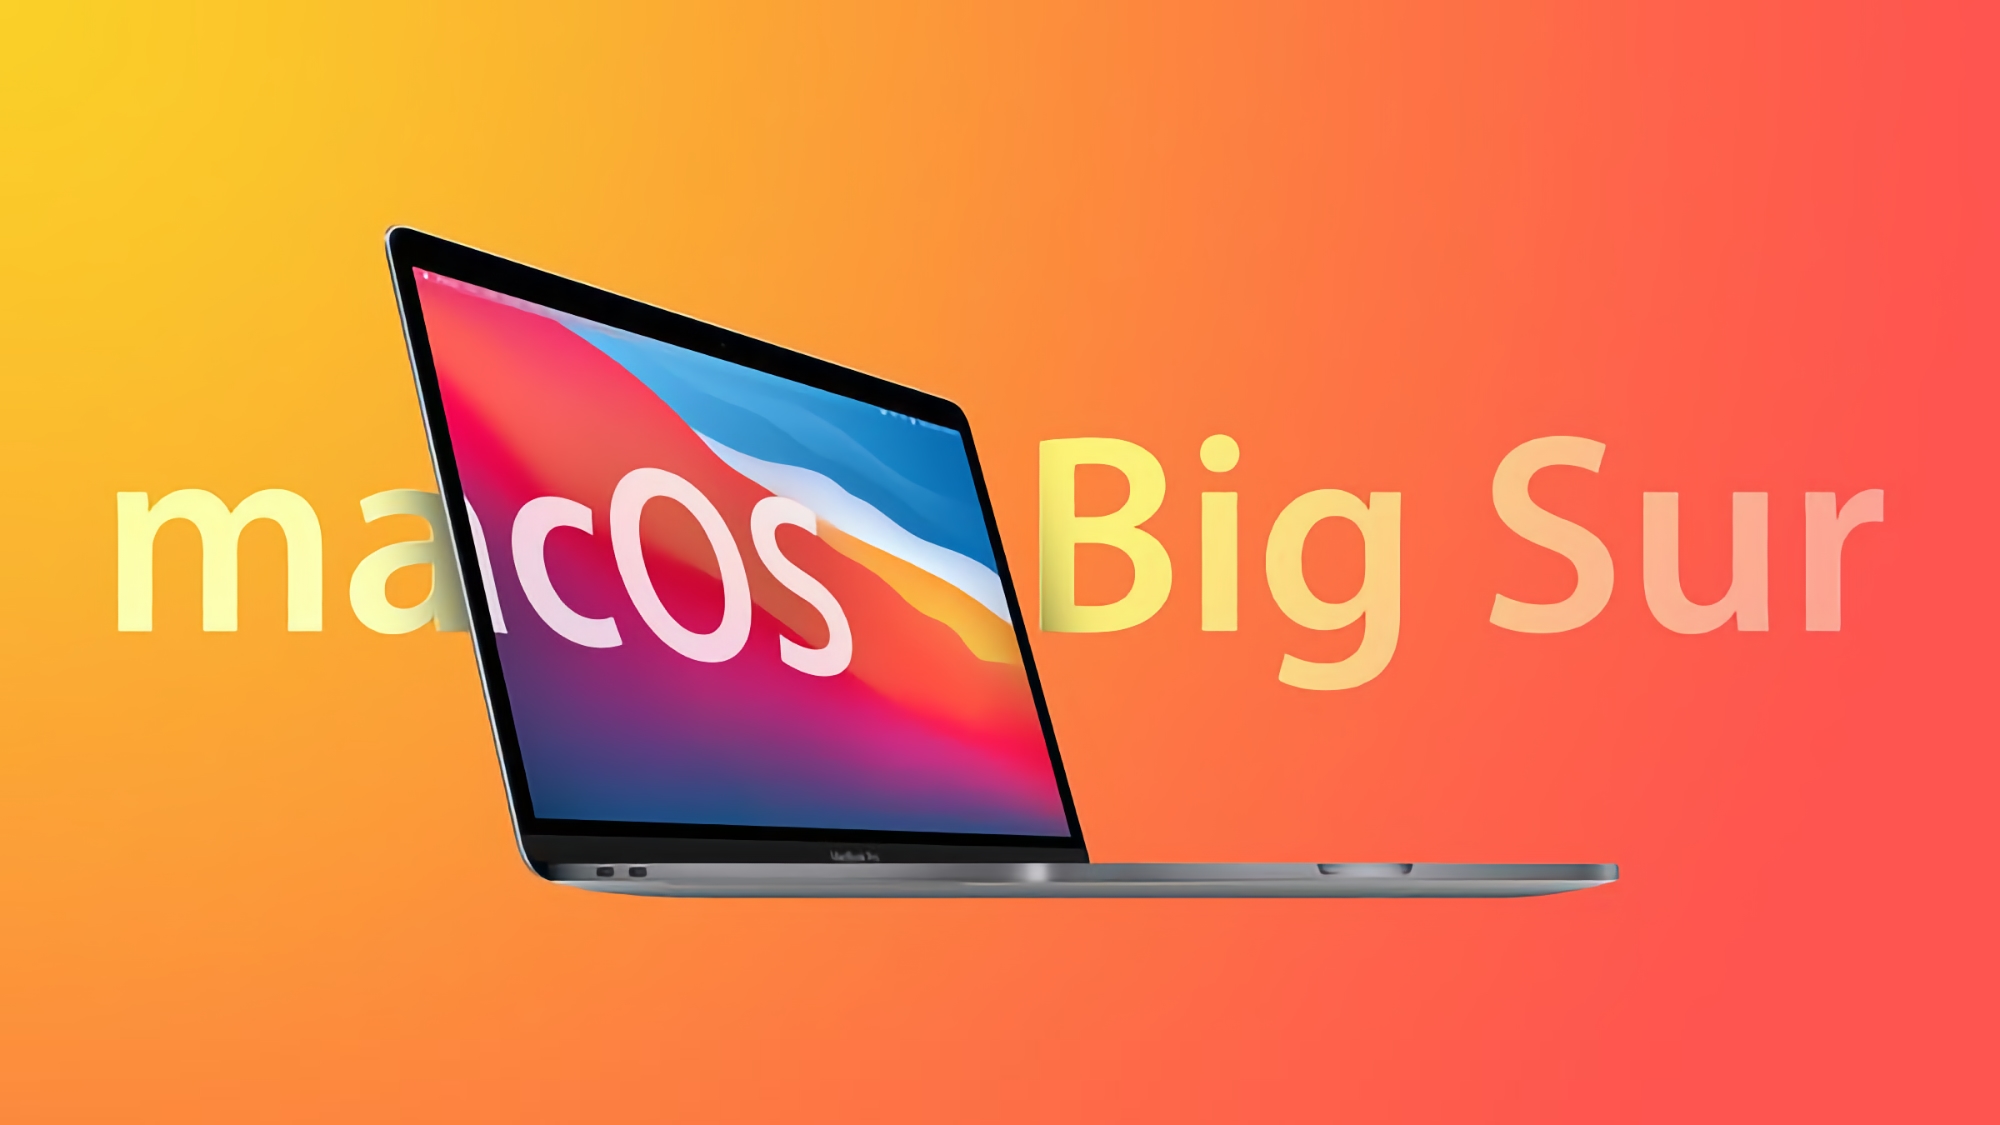 Apple releases important security update for macOS Big Sur users